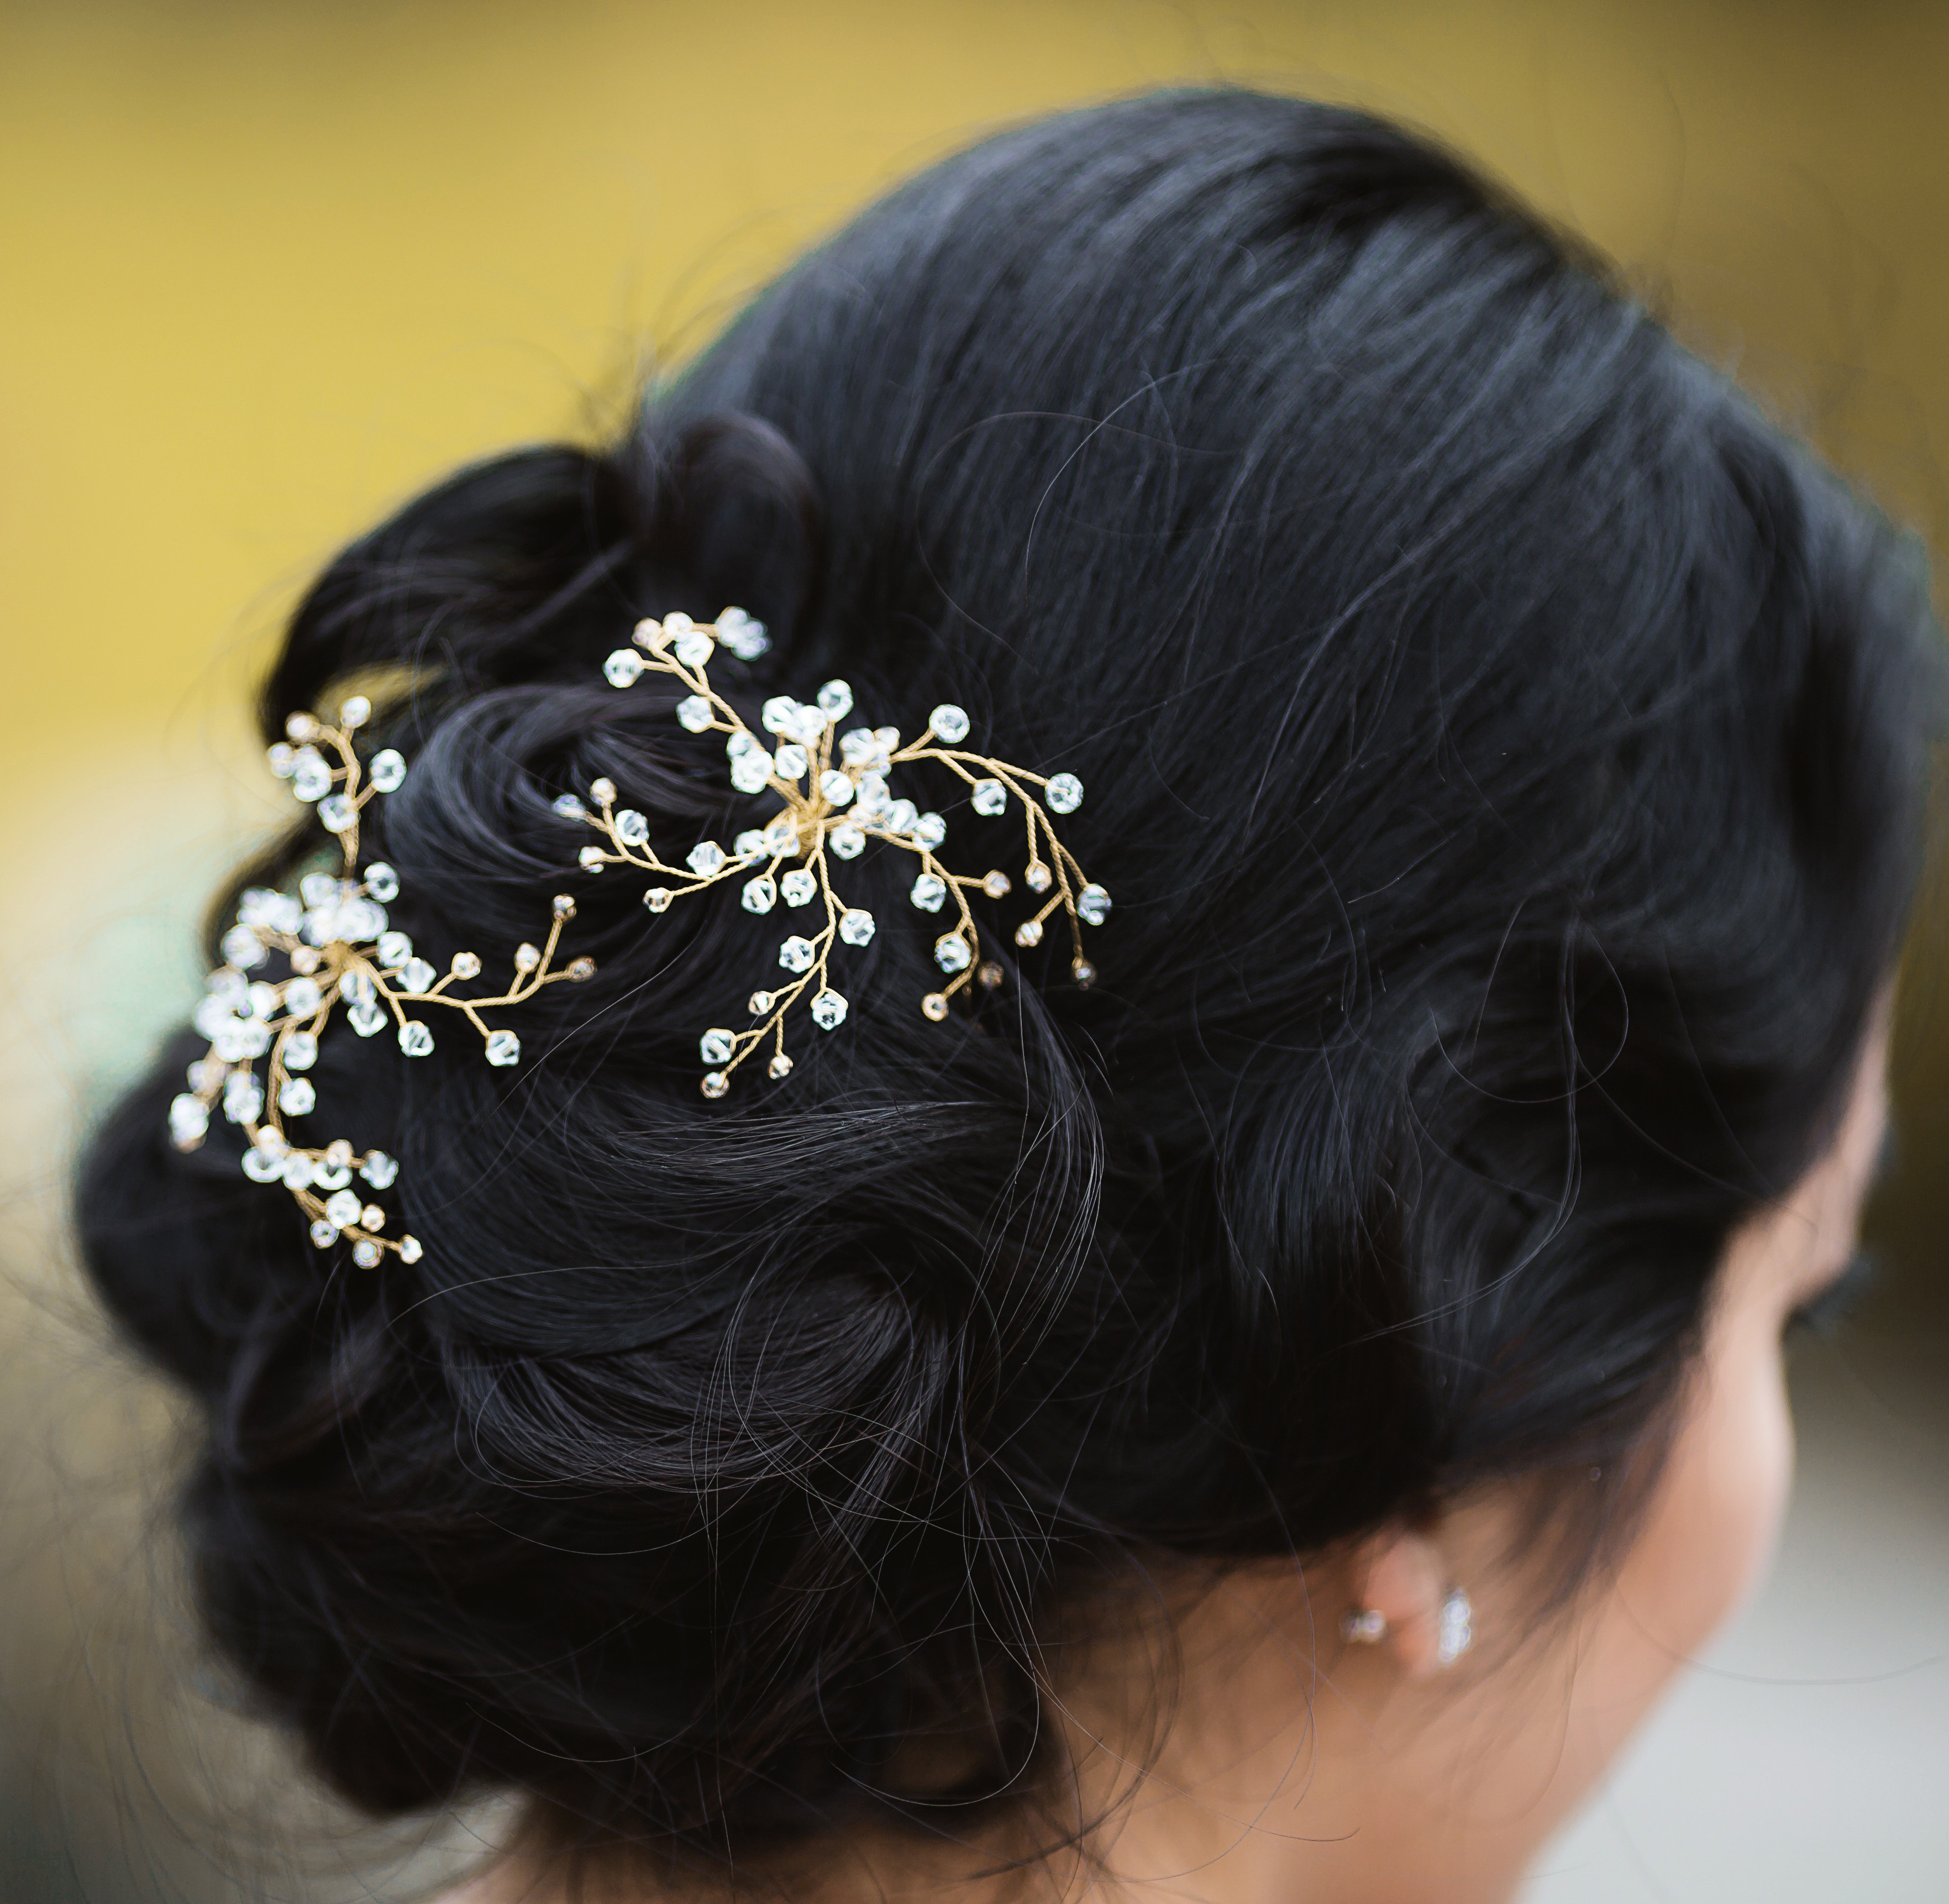 Best ideas about DIY Hair Pins
. Save or Pin DIY Crystal Hair Pins Now.